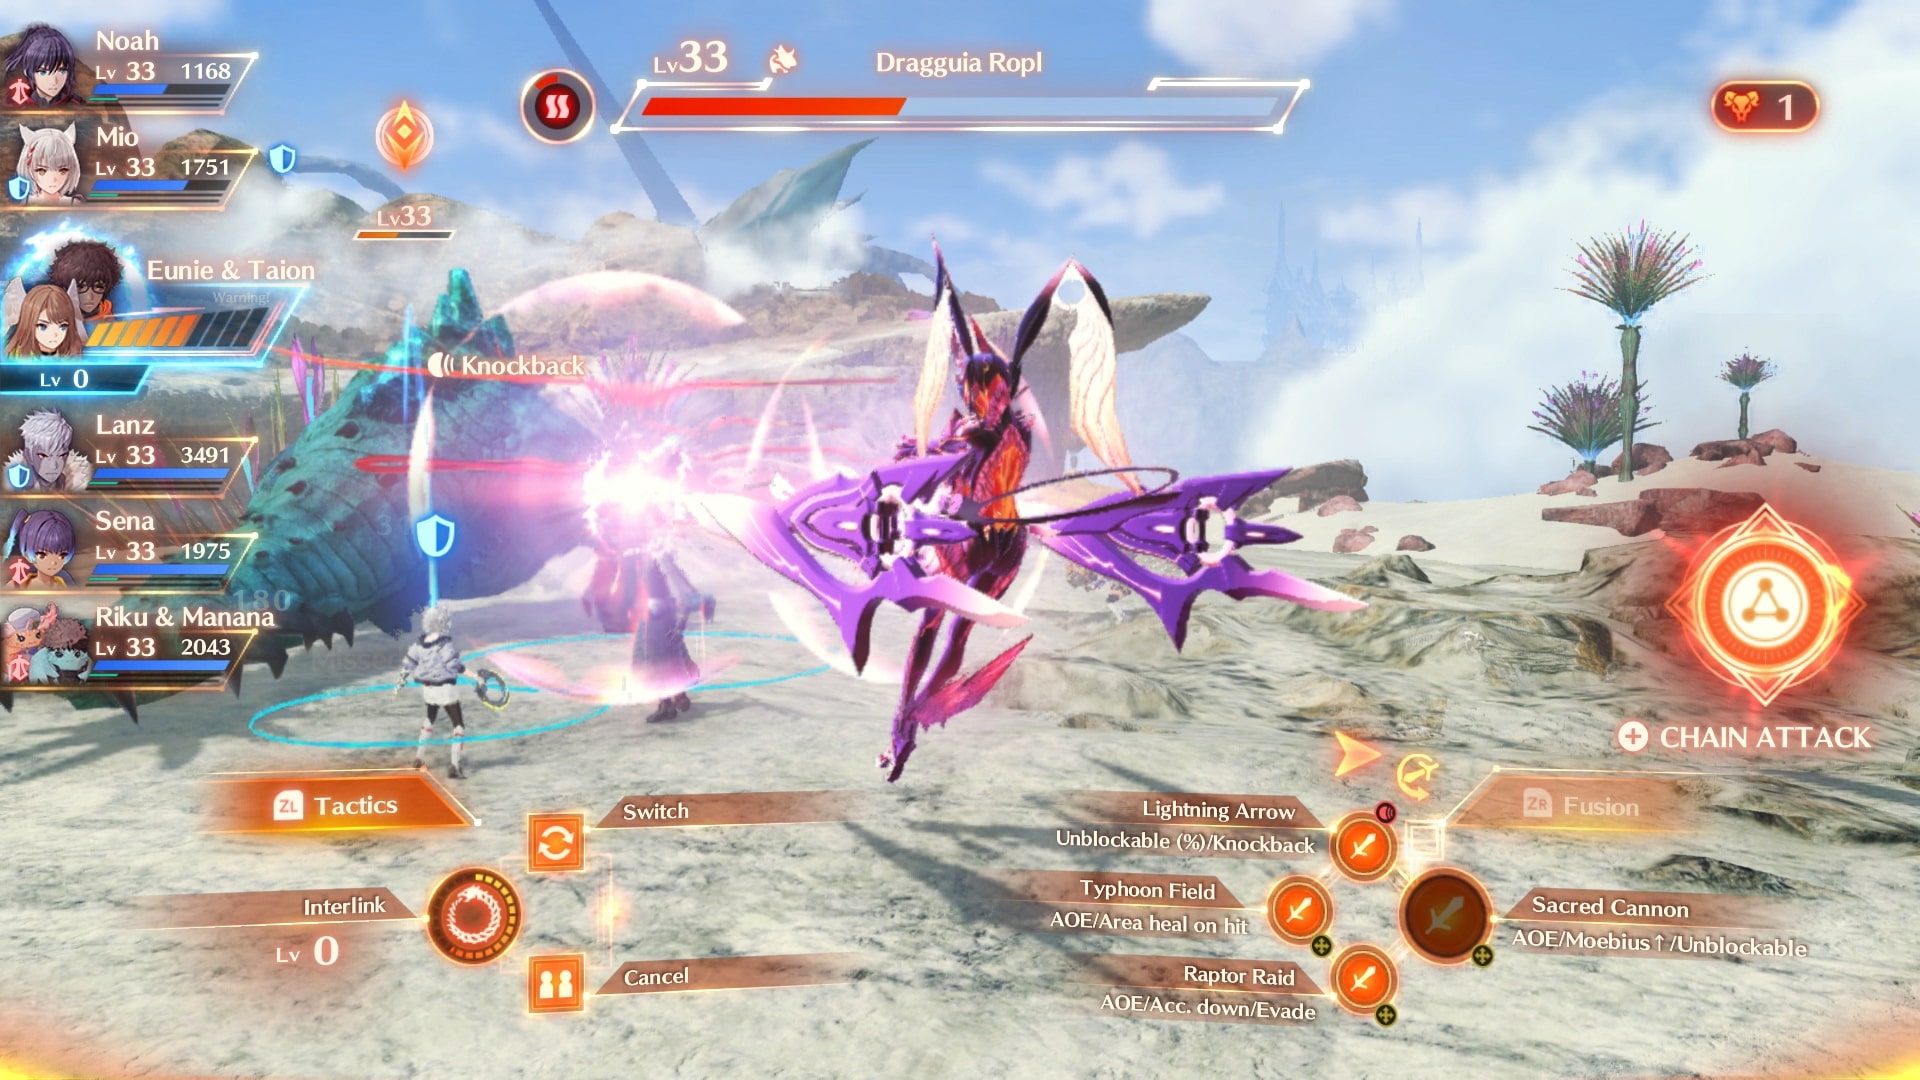 Xenoblade Chronicles 3 for Nintendo Switch review: A massive tale